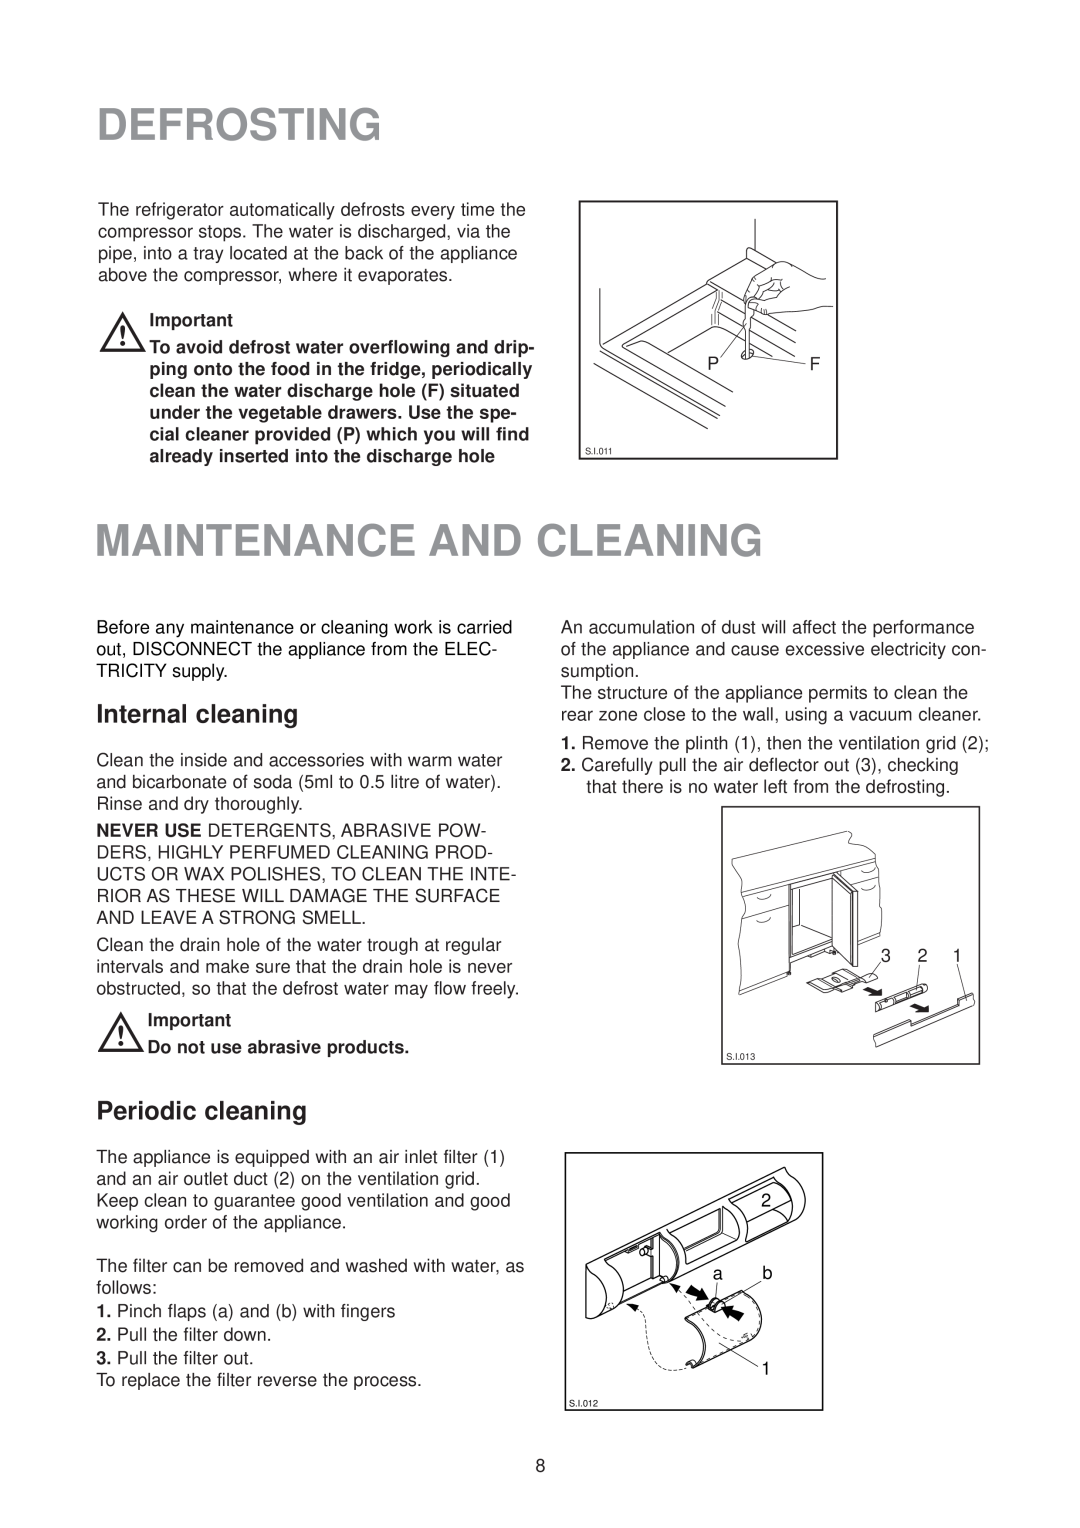 Zanussi ZU 7155 Defrosting, Maintenance And Cleaning, Internal cleaning, Periodic cleaning, Do not use abrasive products 